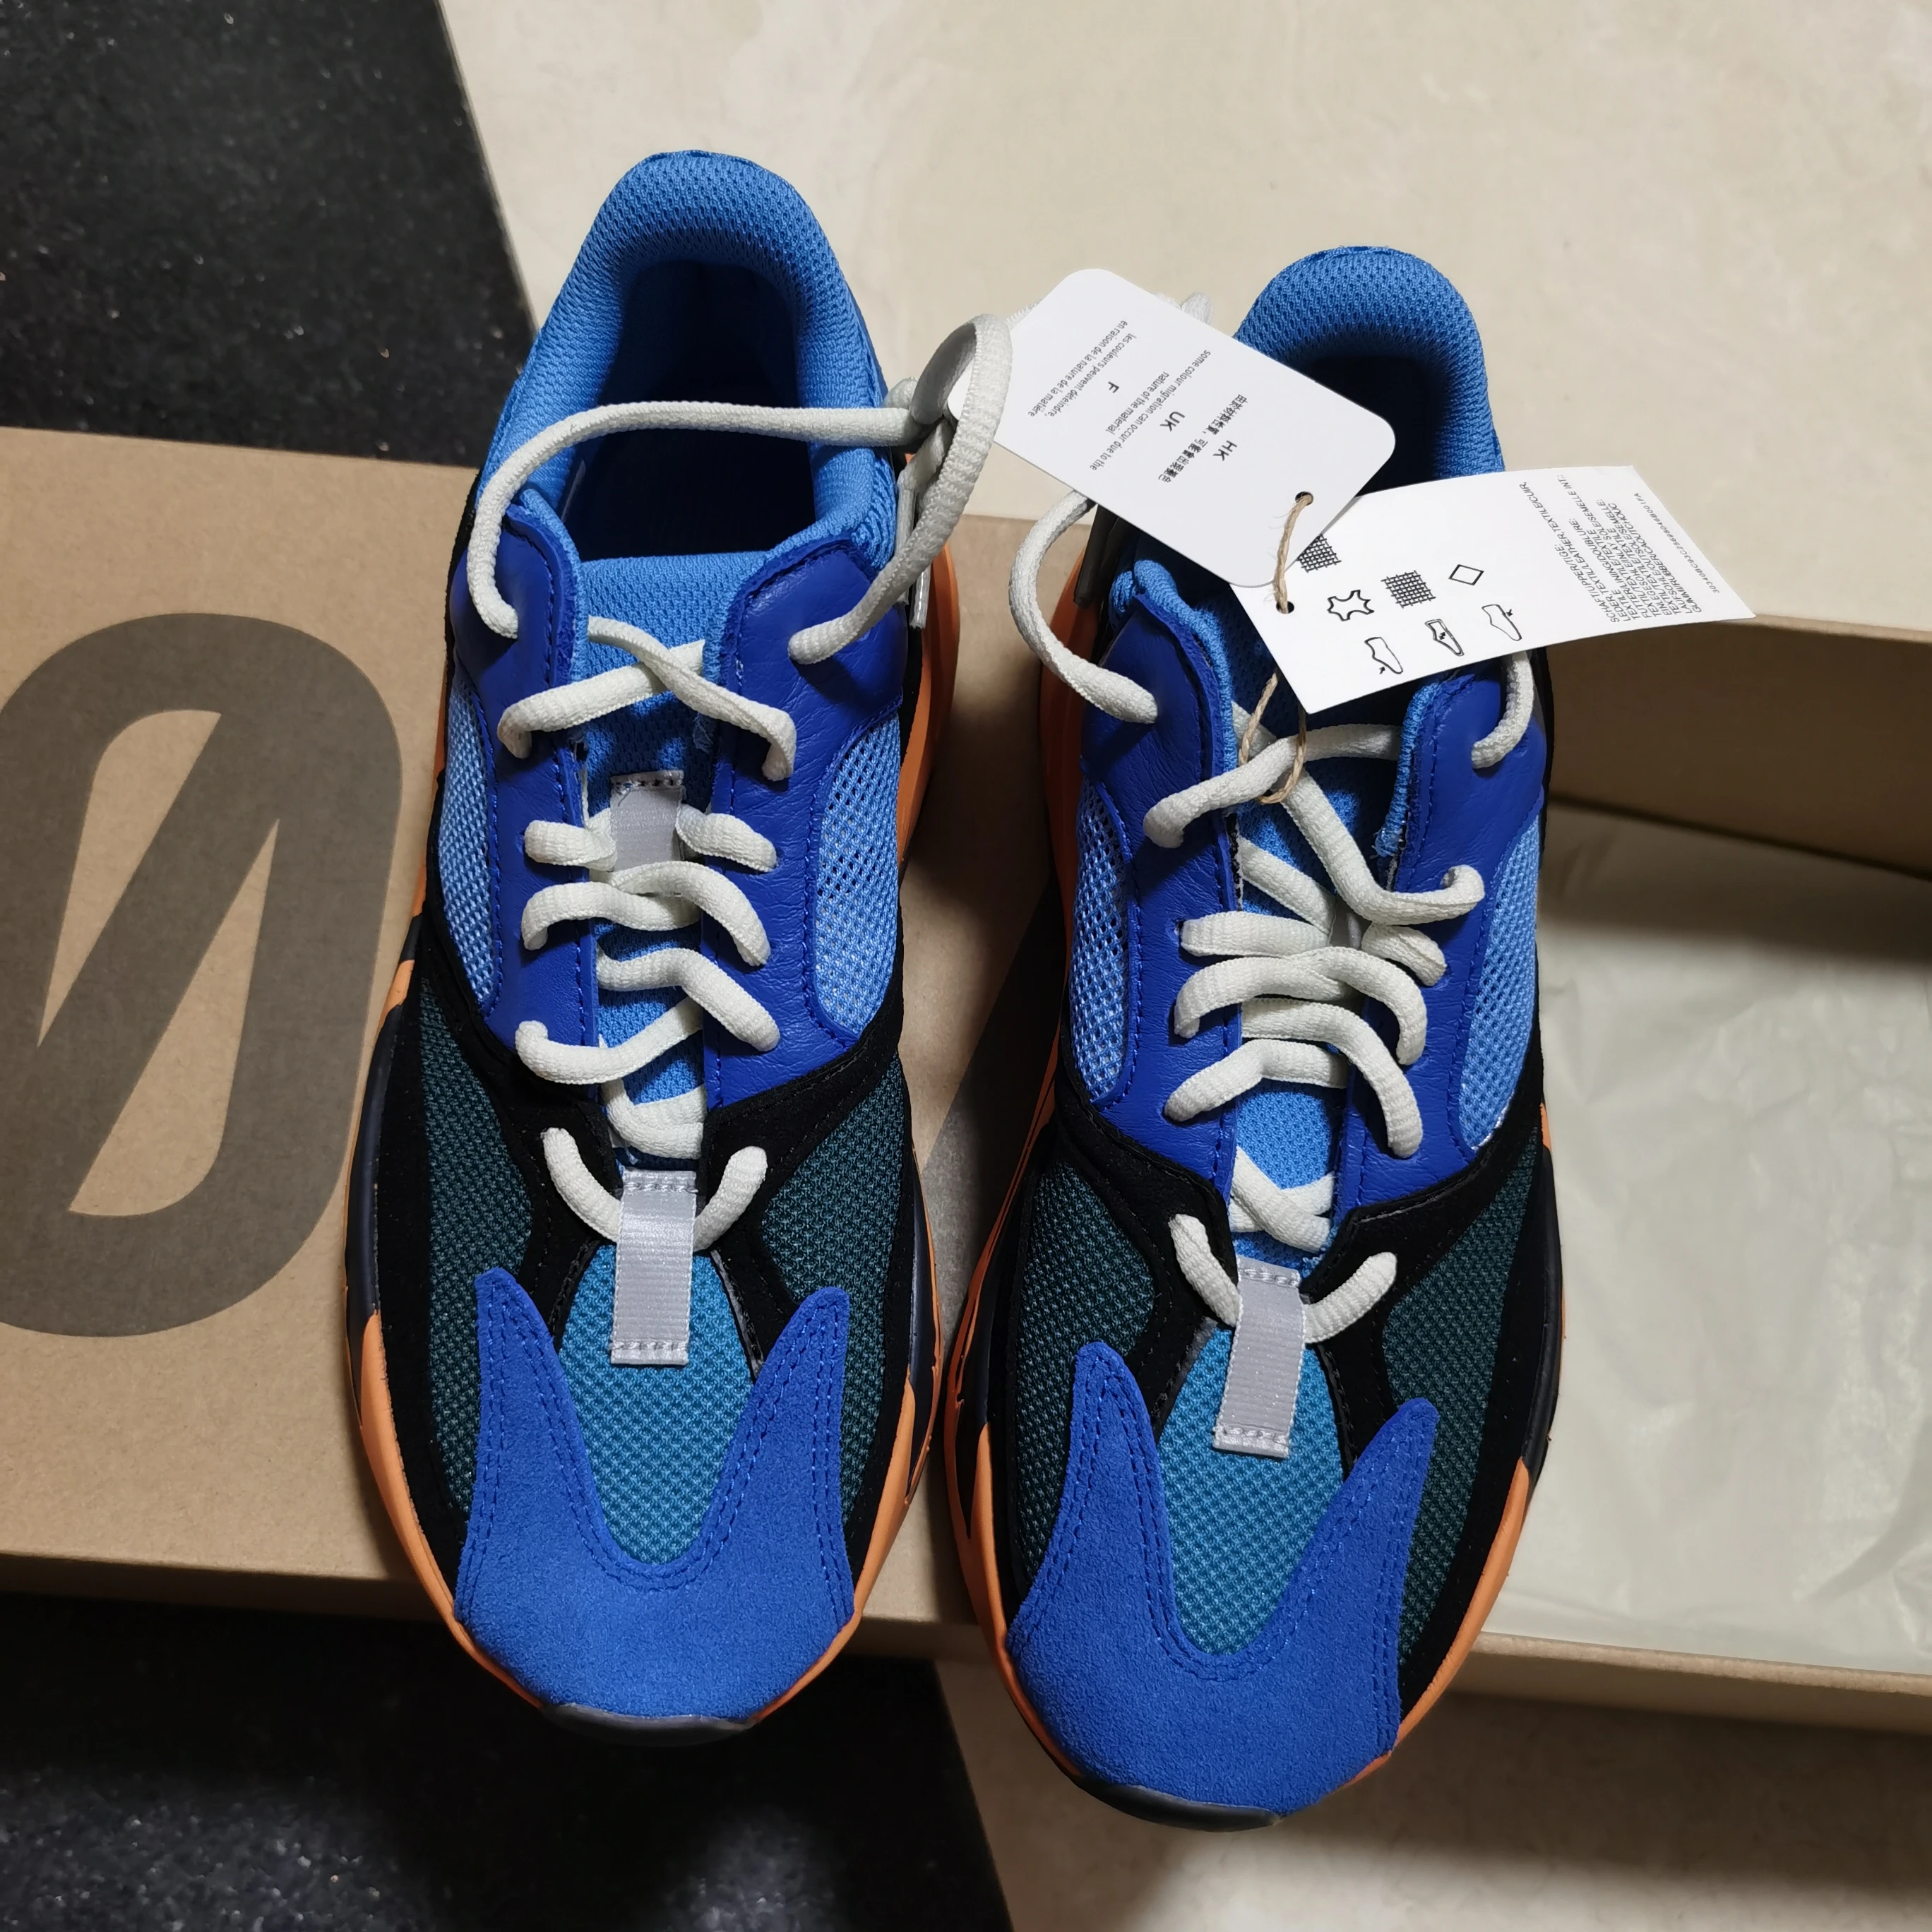 

pkquality ( better than 1:1 quality )yeezy 700 reflective v2 bright blue men woman running shoes sport sneakers